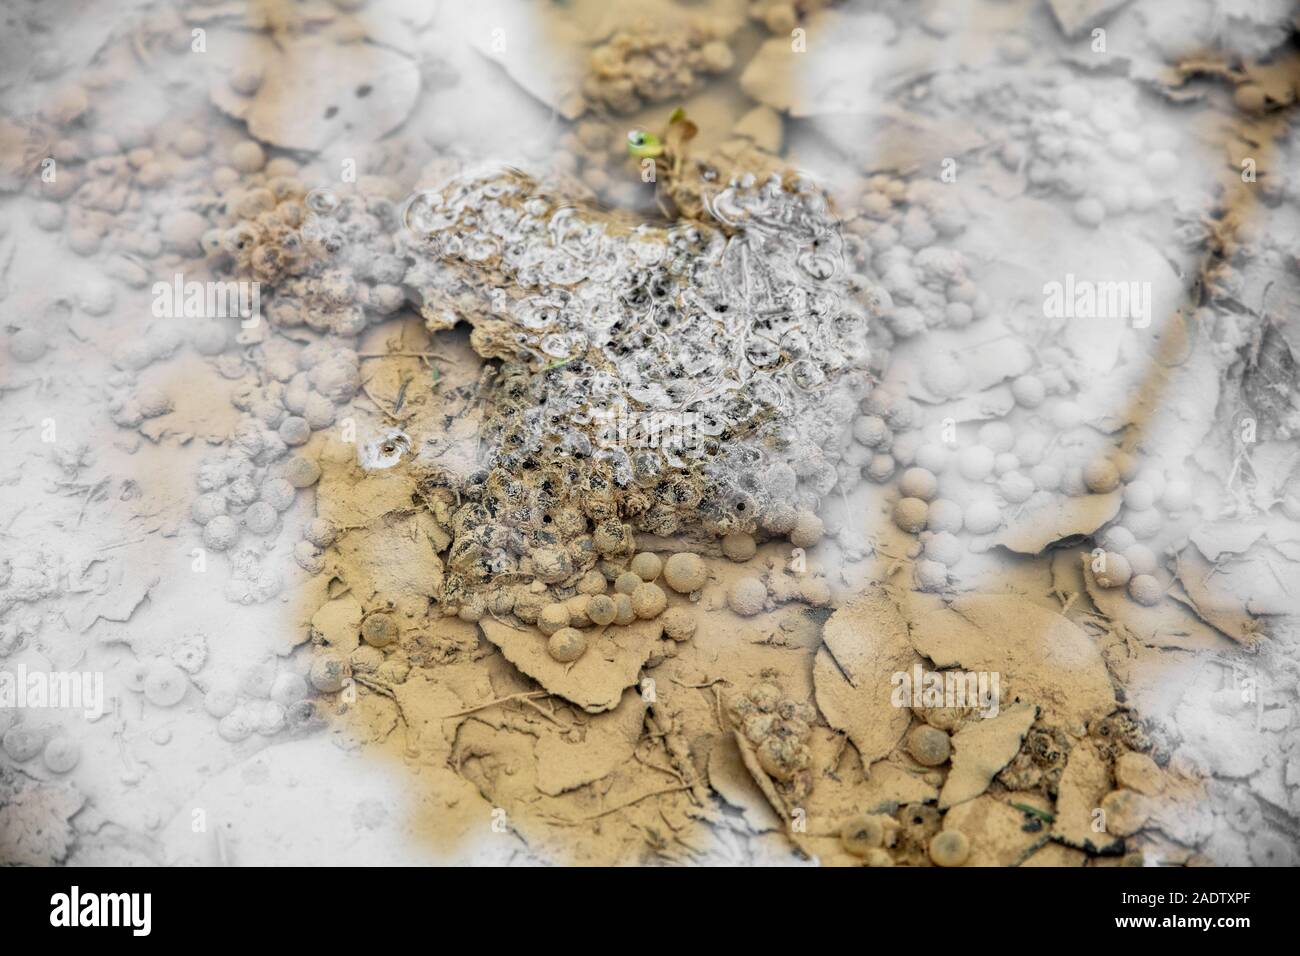 Frog spawn into a wild pond, amphibians eggs on water Stock Photo